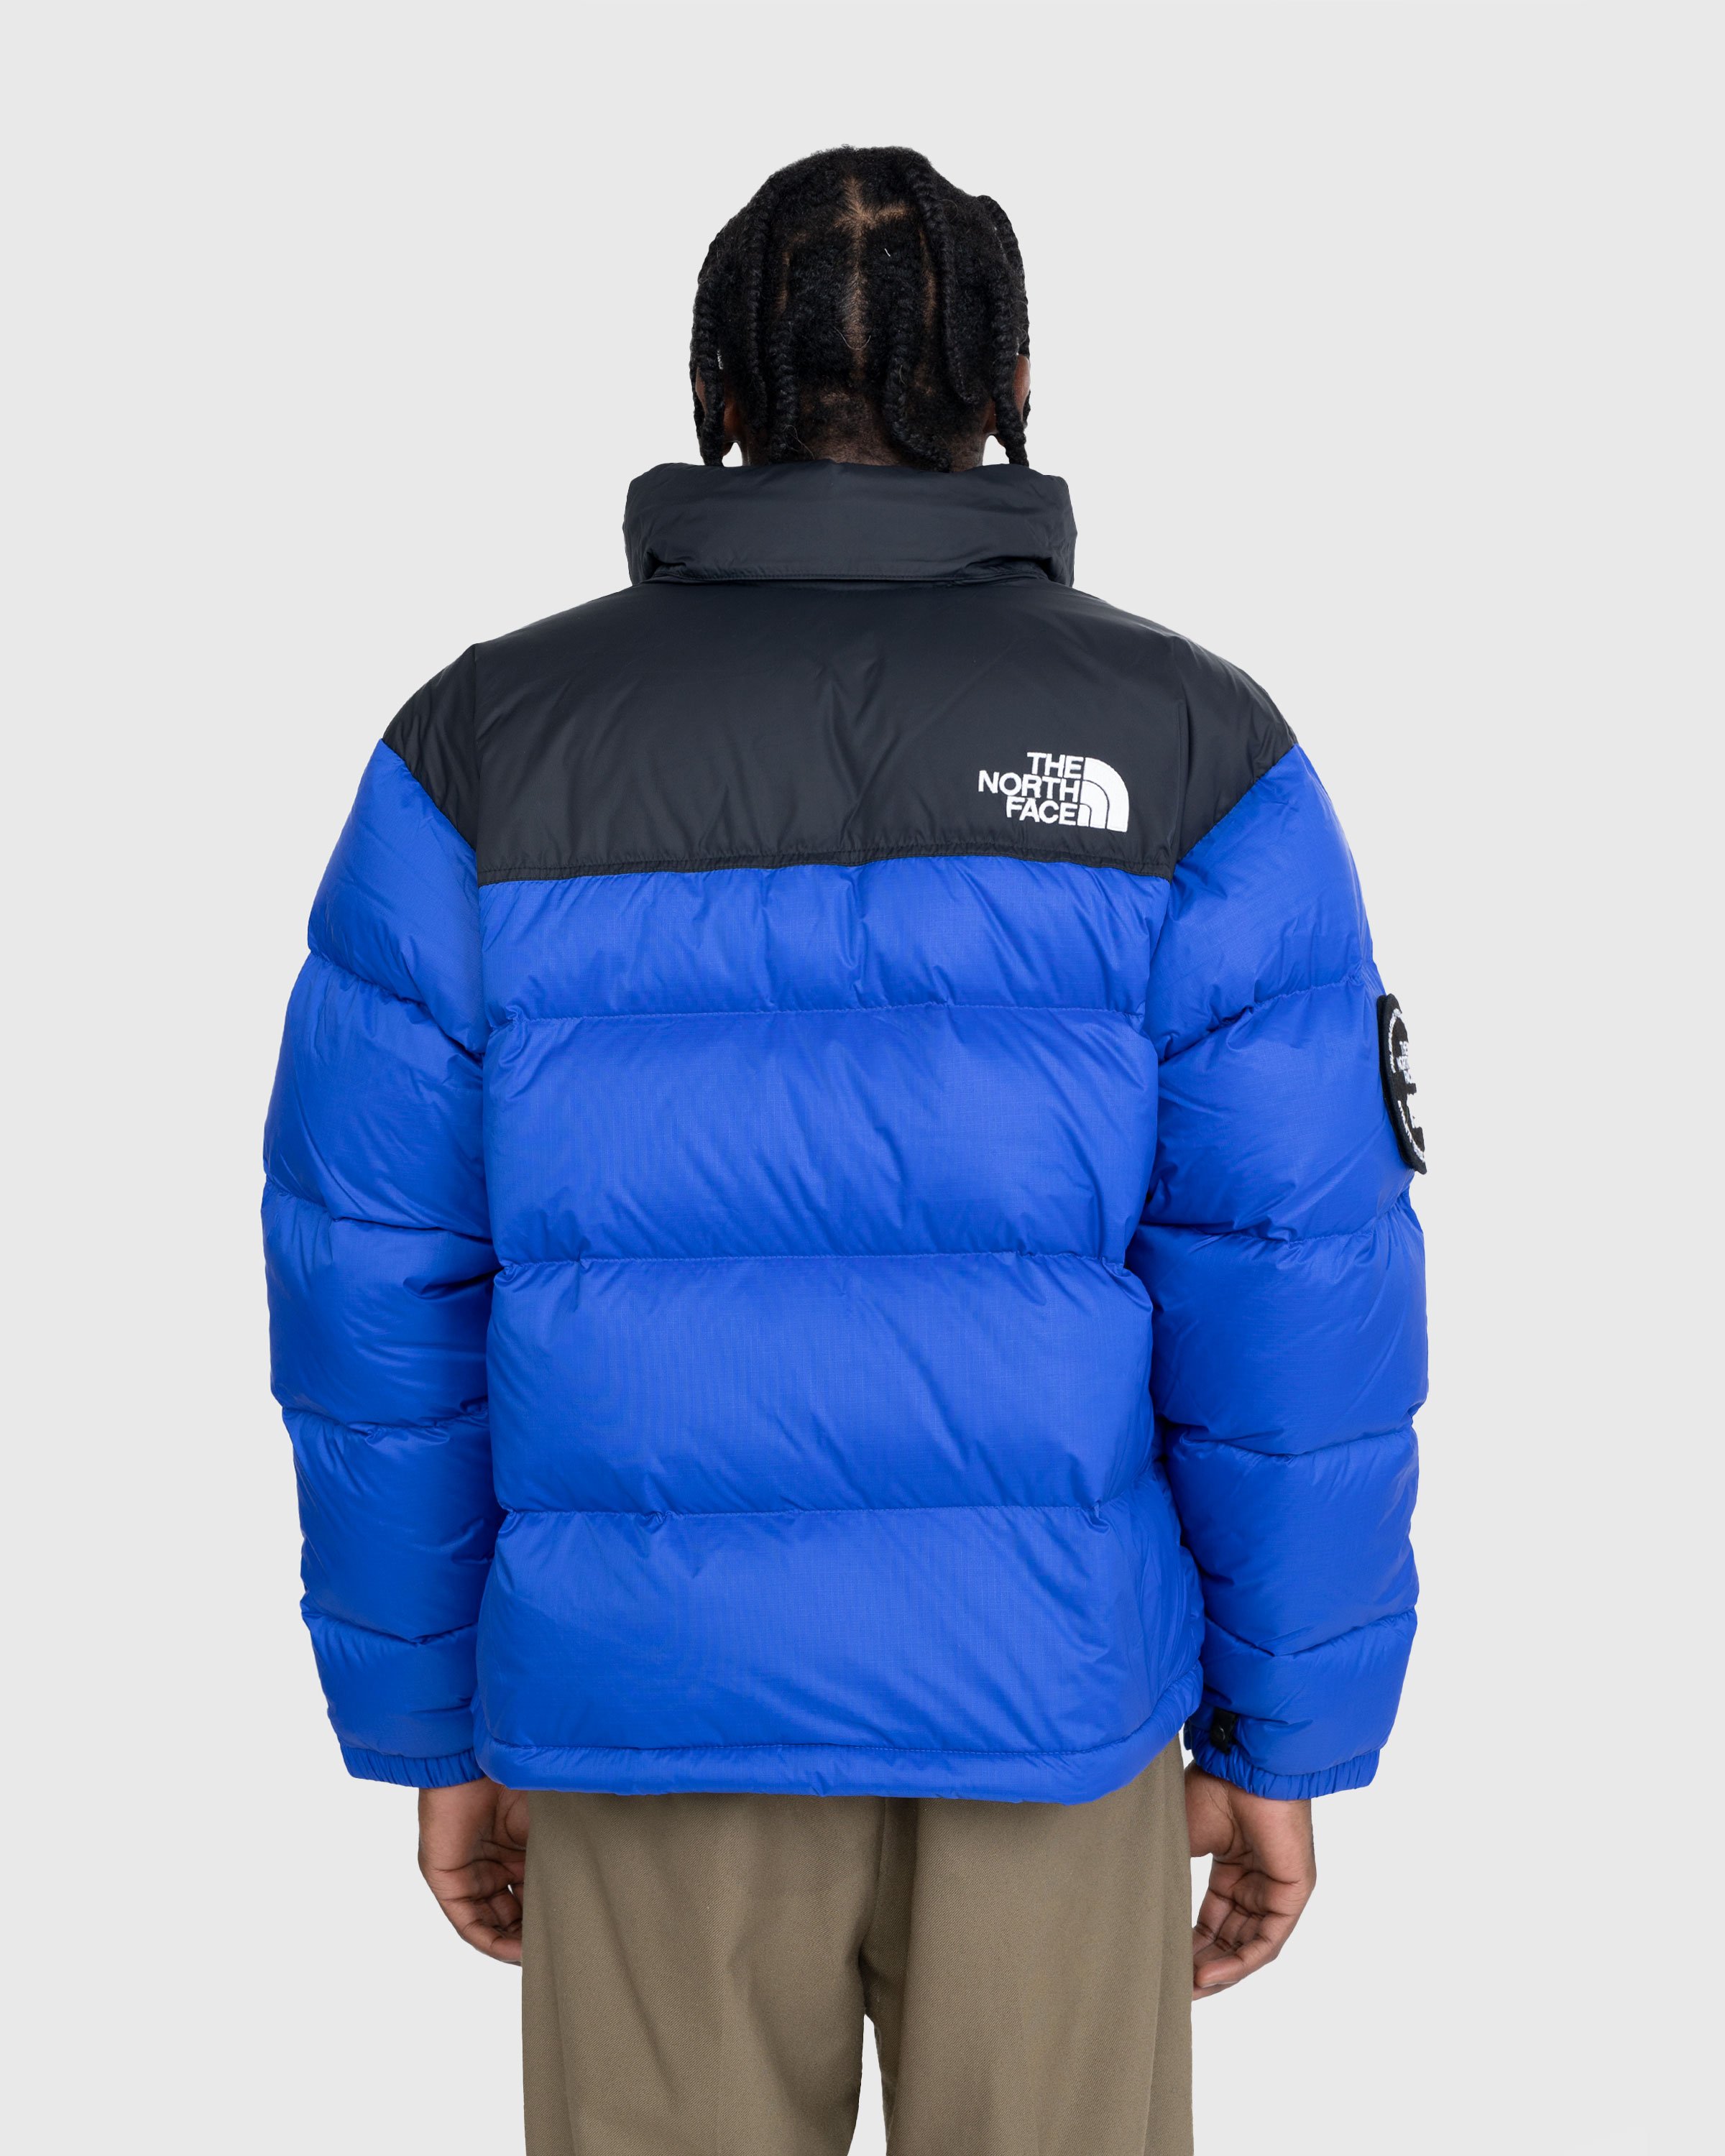 The North Face - ‘92 Retro Anniversary Nuptse Jacket Blue - Clothing - Red - Image 3